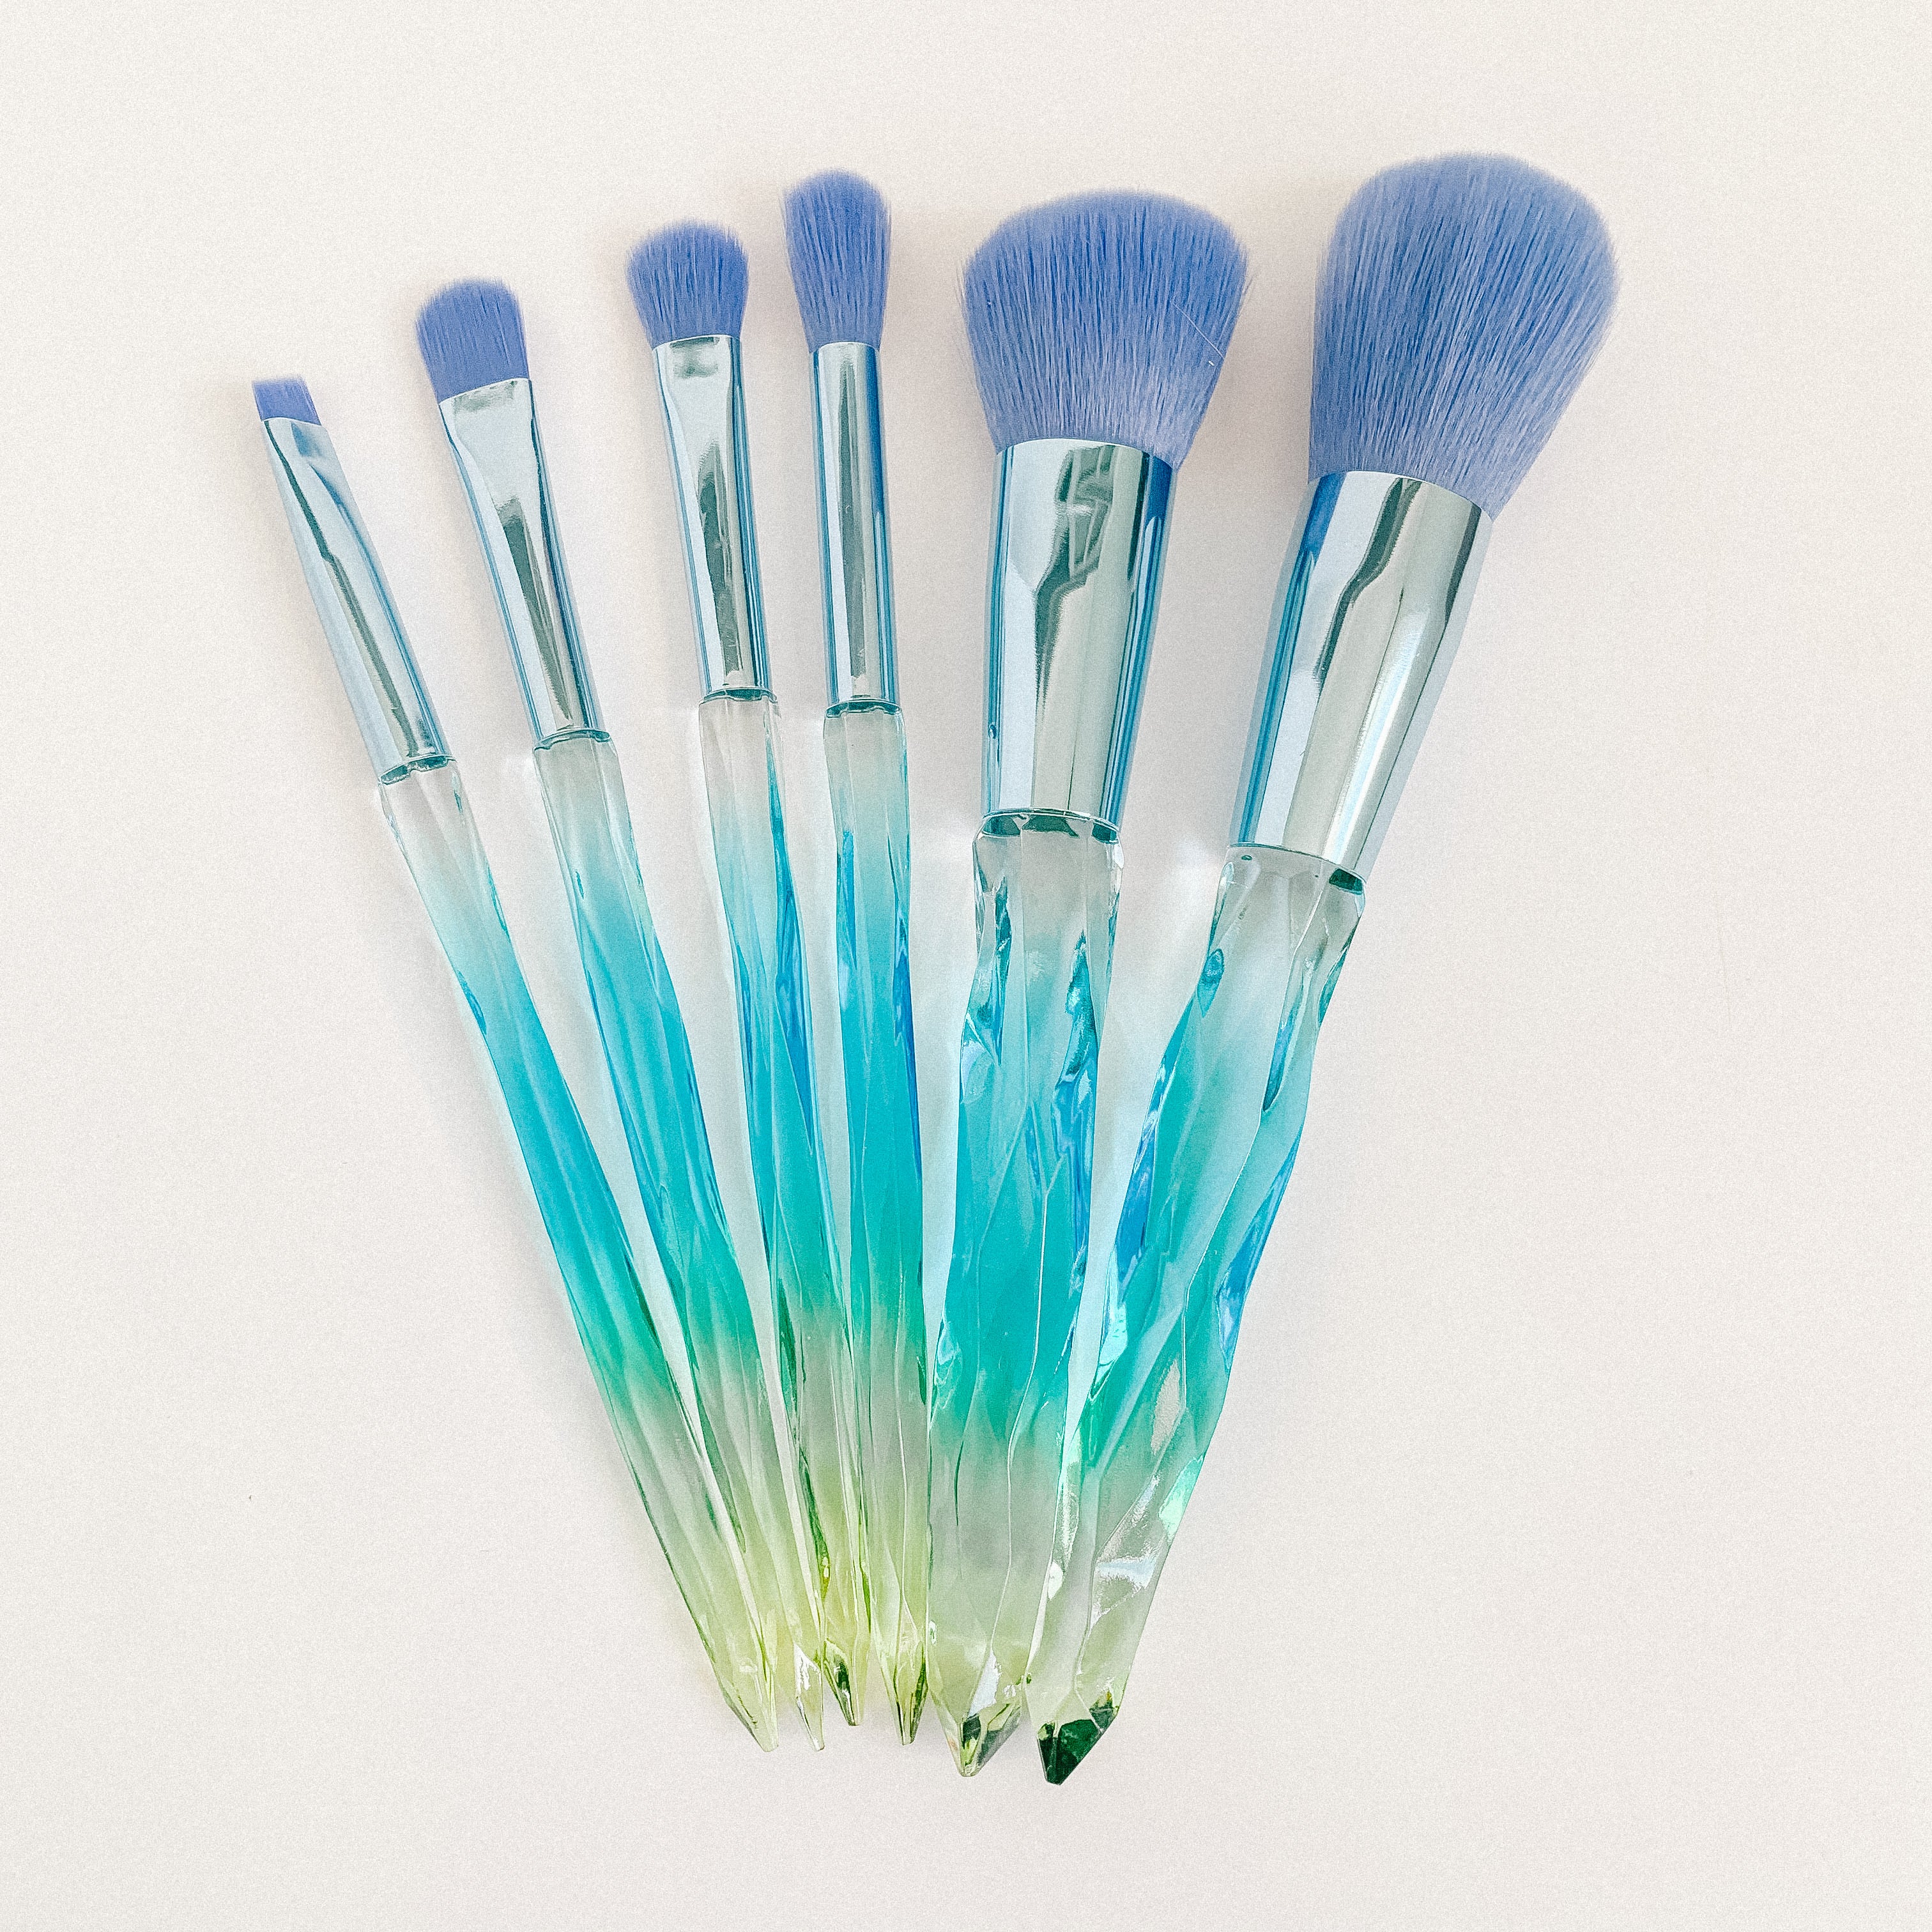 Makeup brushes for mama - Little Lily Shop